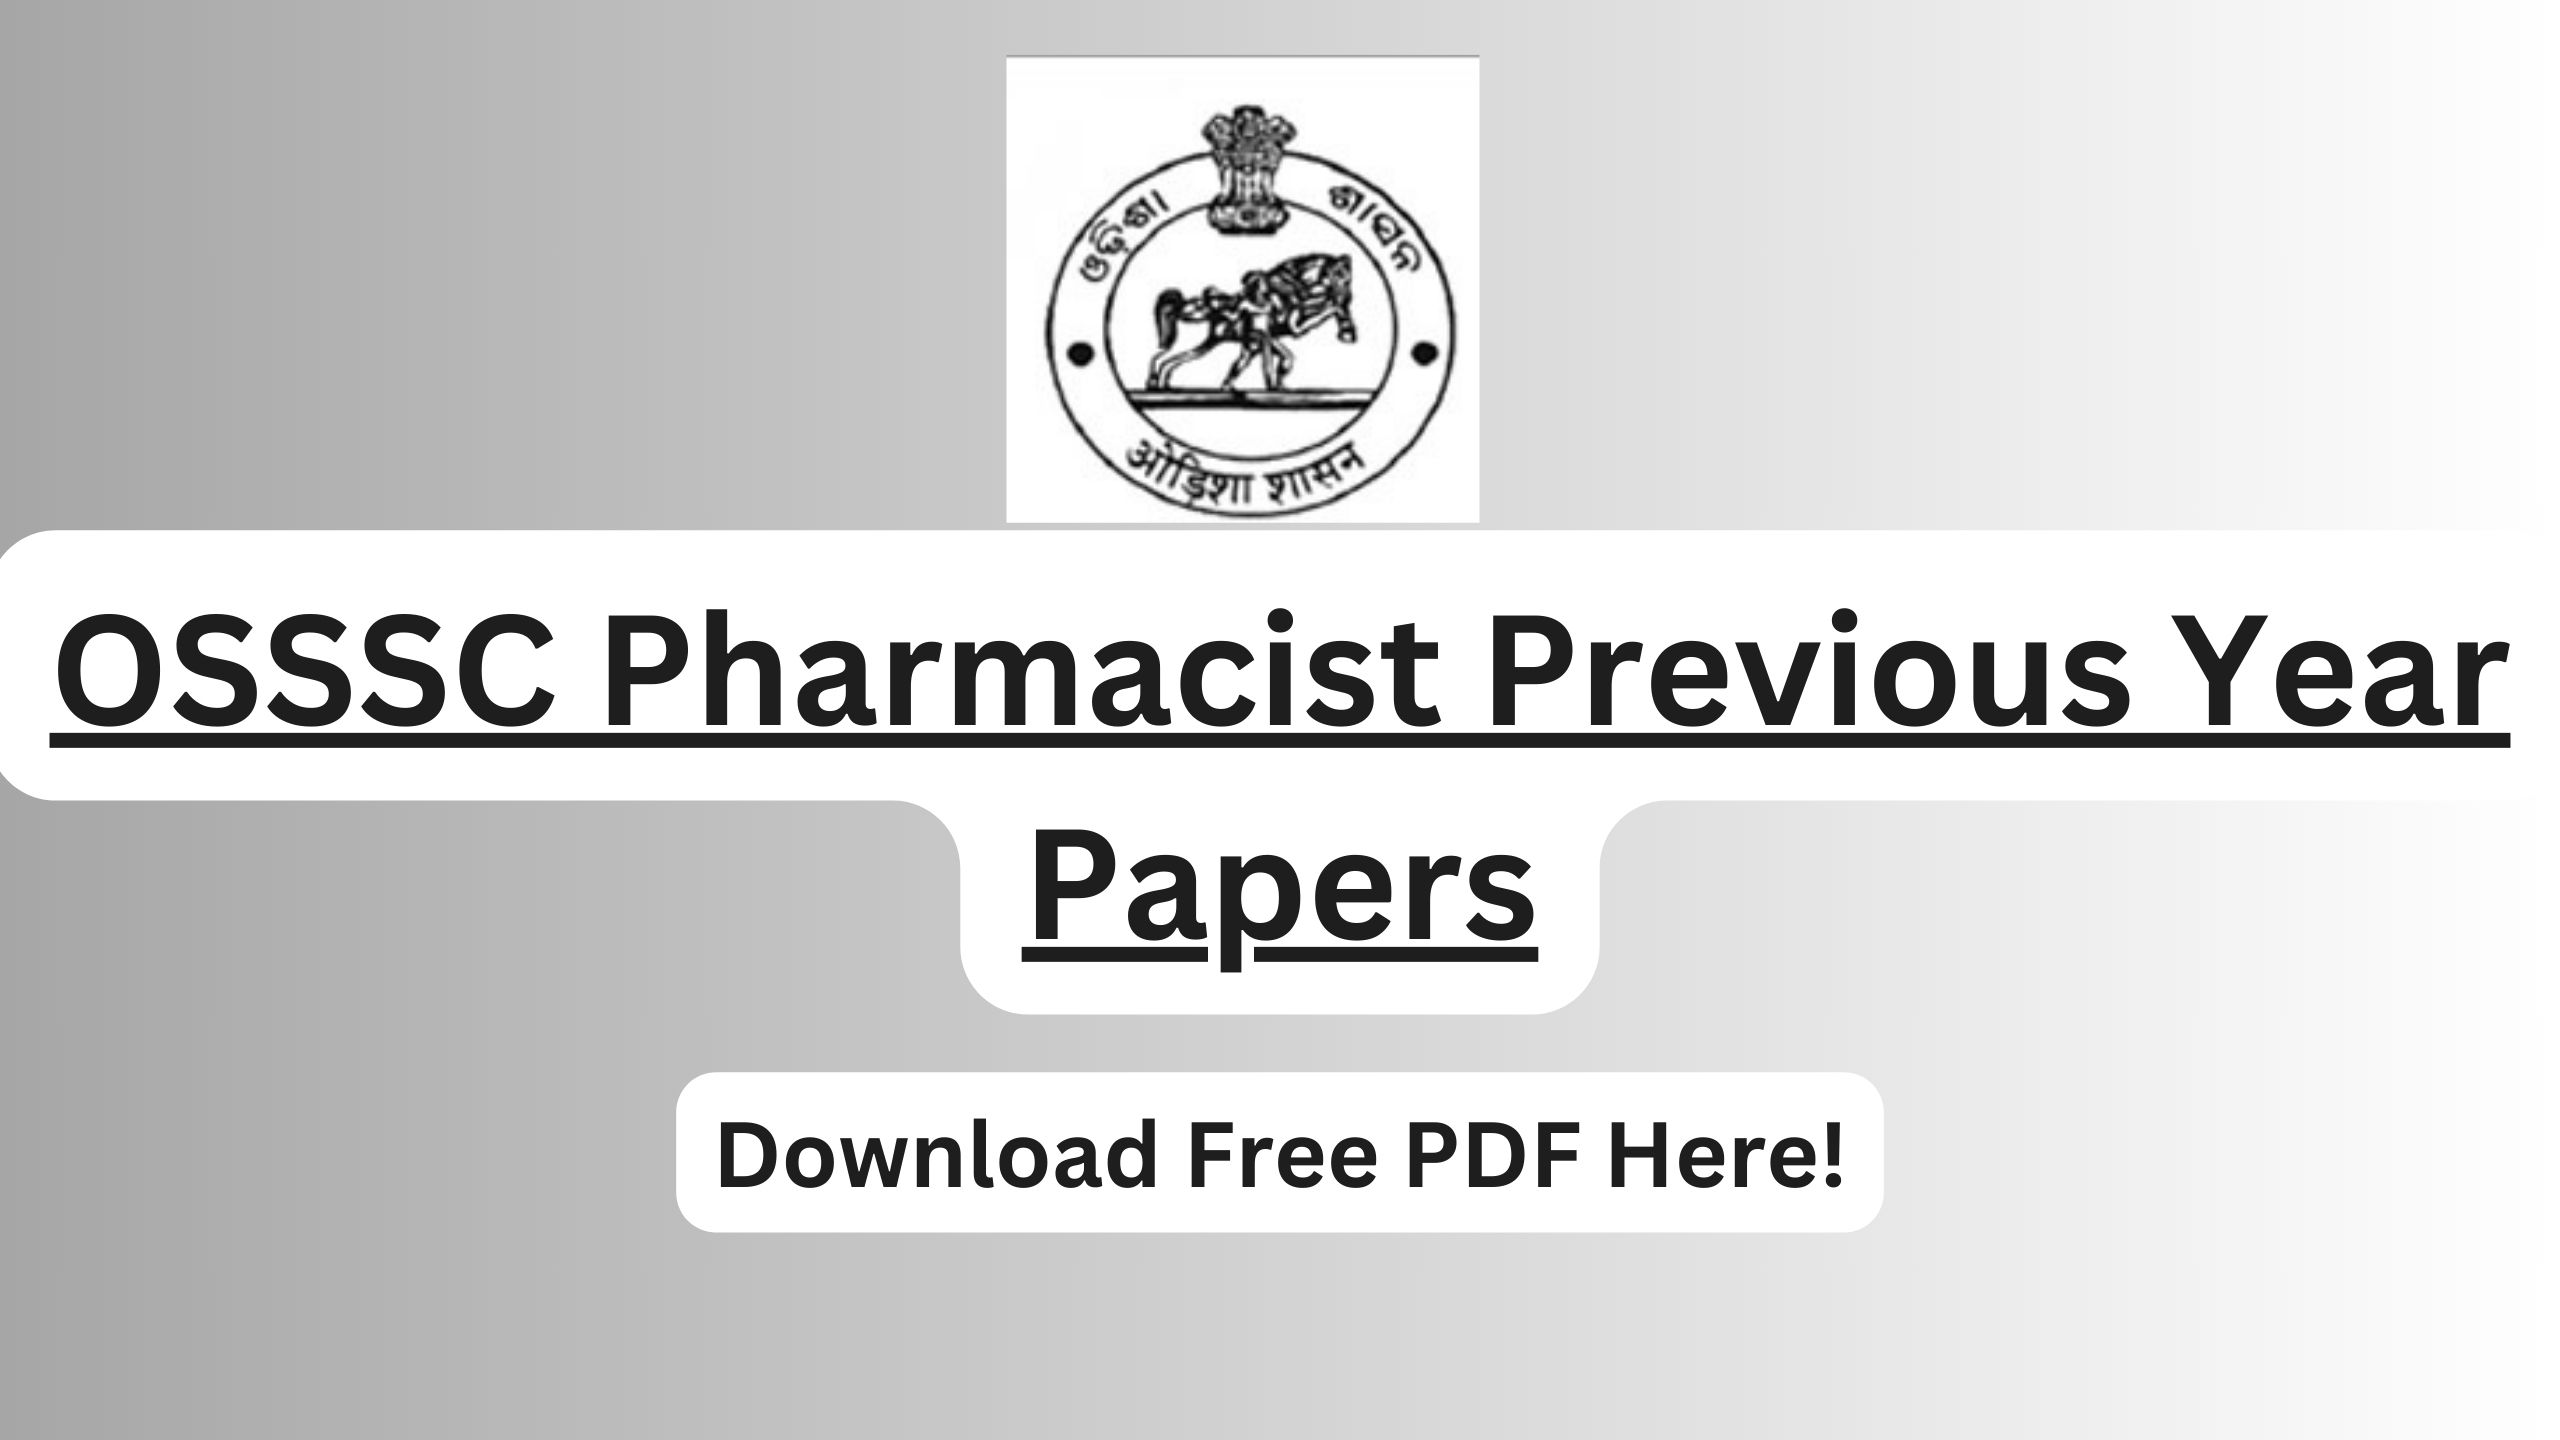 OSSSC Pharmacist Previous Year Papers